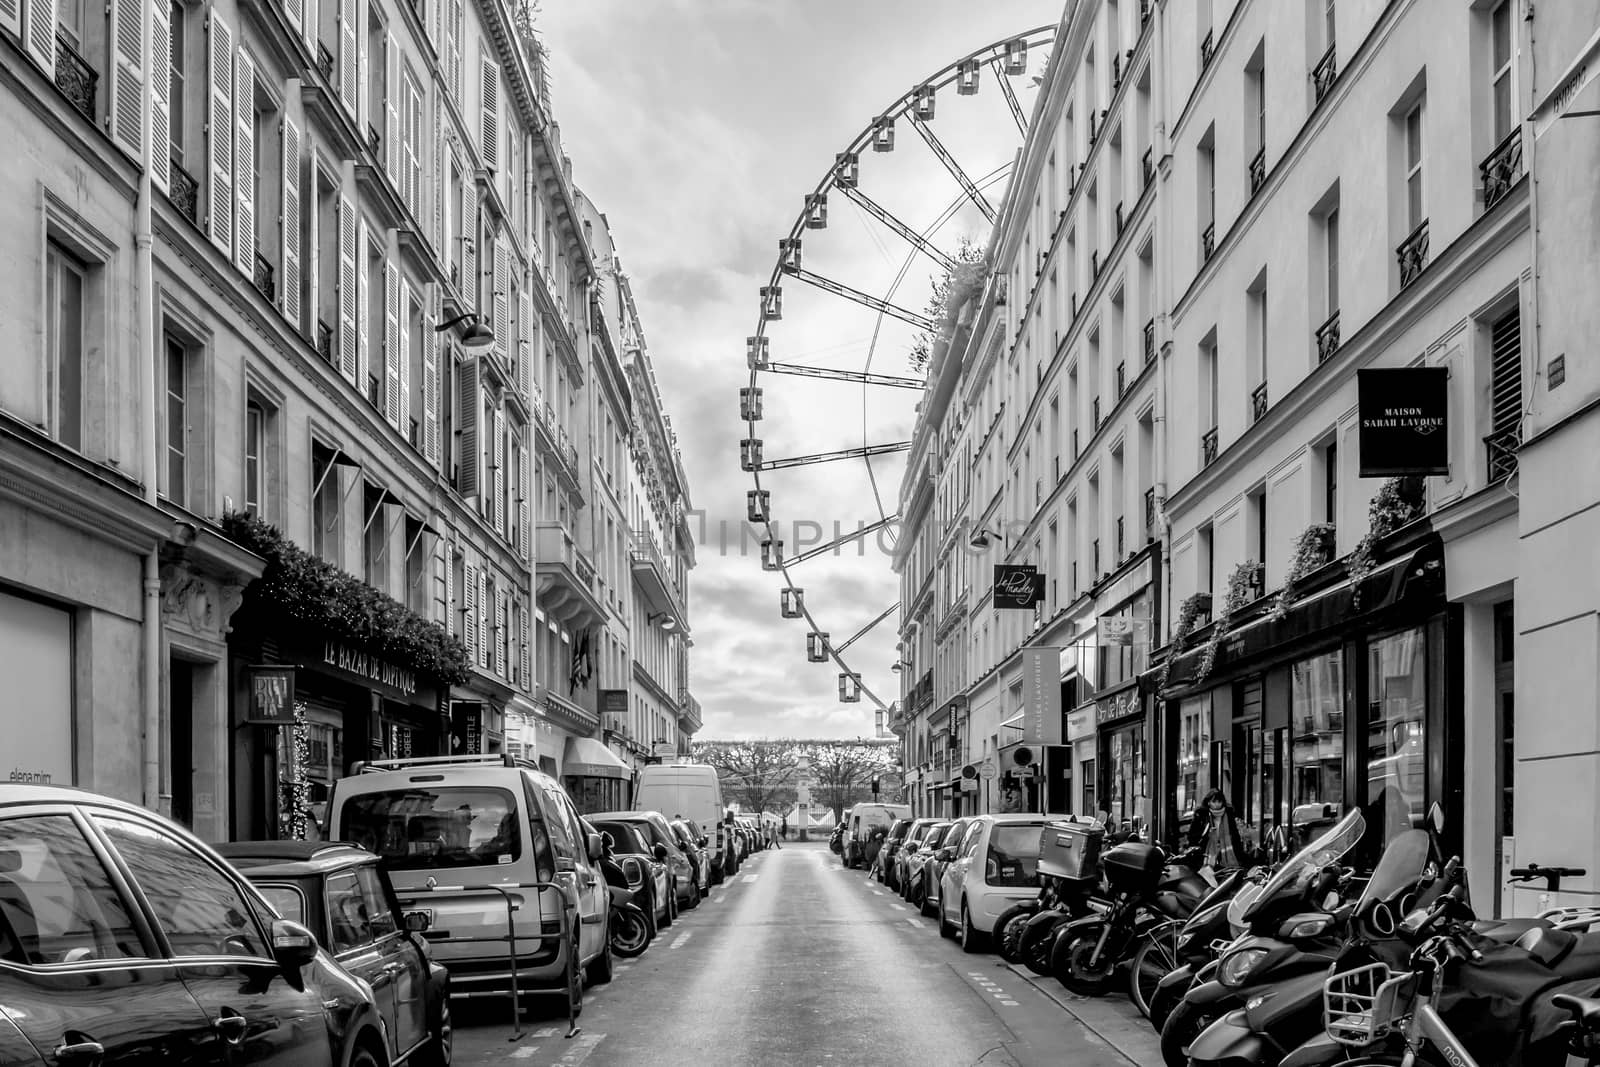 "Roue de la Concorde", Wheel of Concorde square in french, very famous Attraction in paris, view from " Rue saint Honoré ". Black and white picture